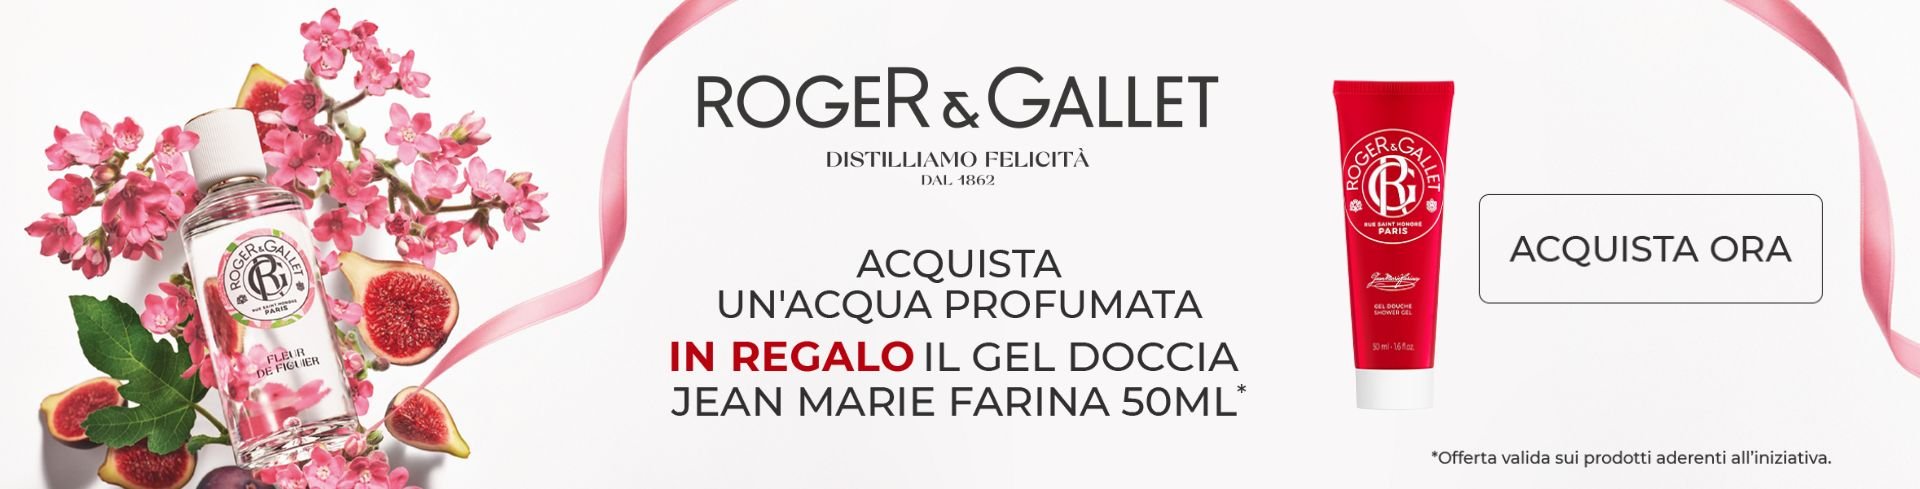 roger gallet promo acque profumate